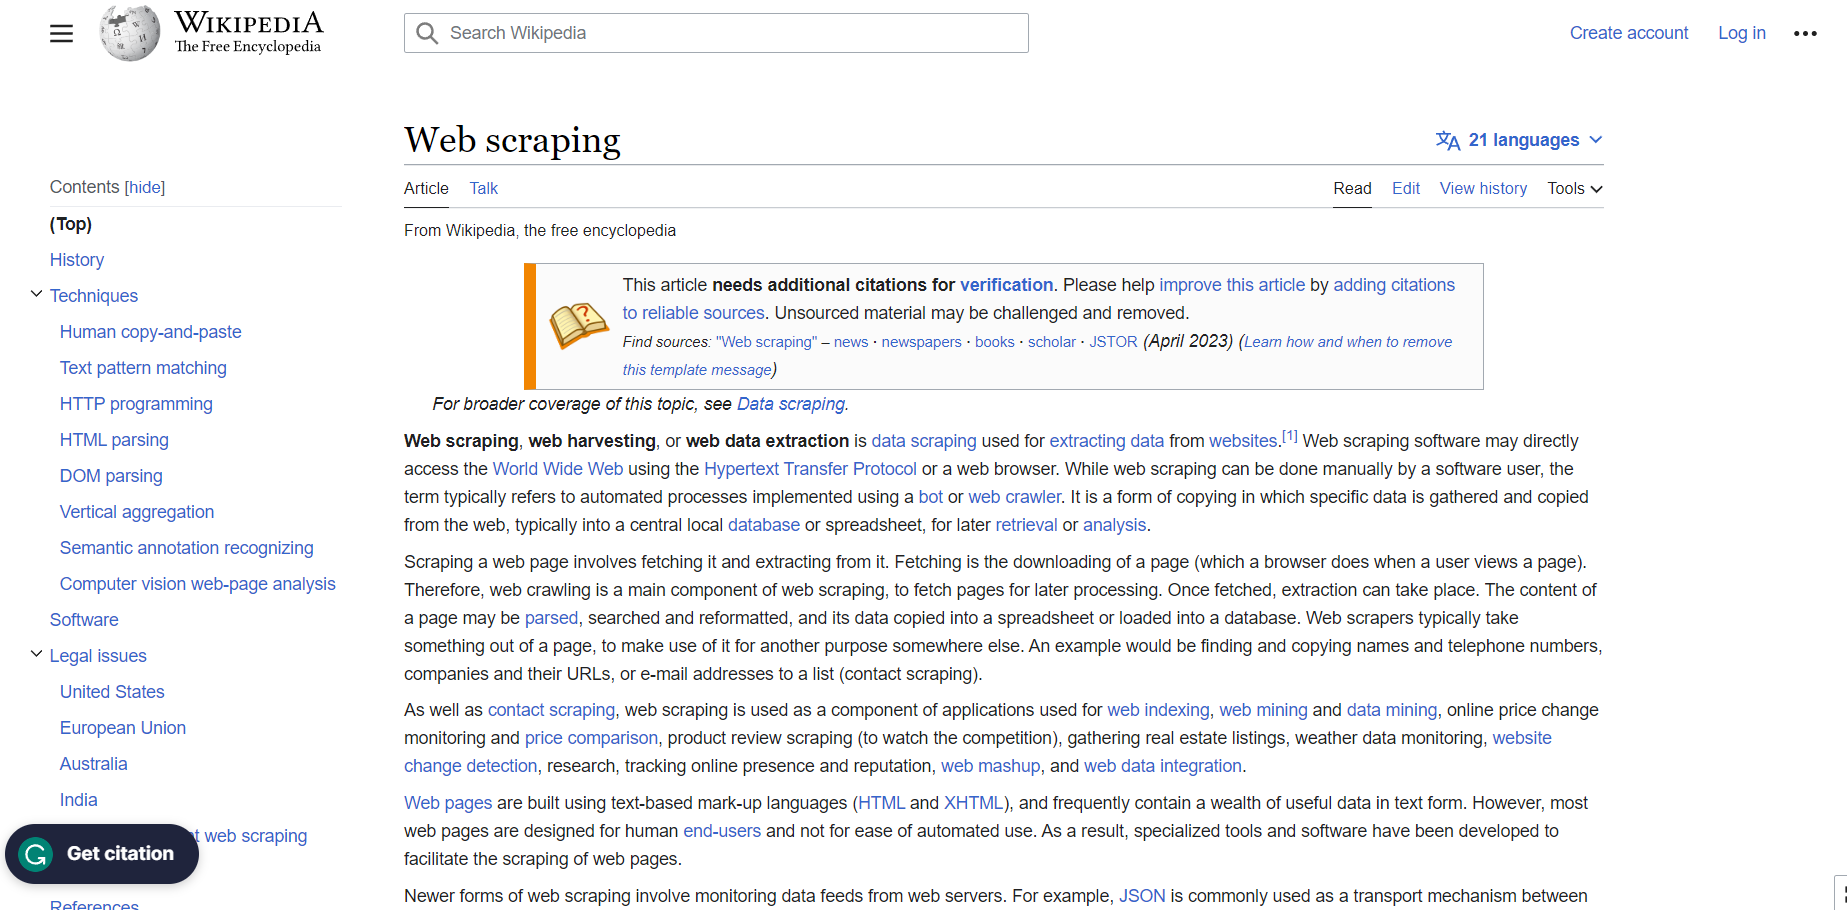 Wikipedia Overview